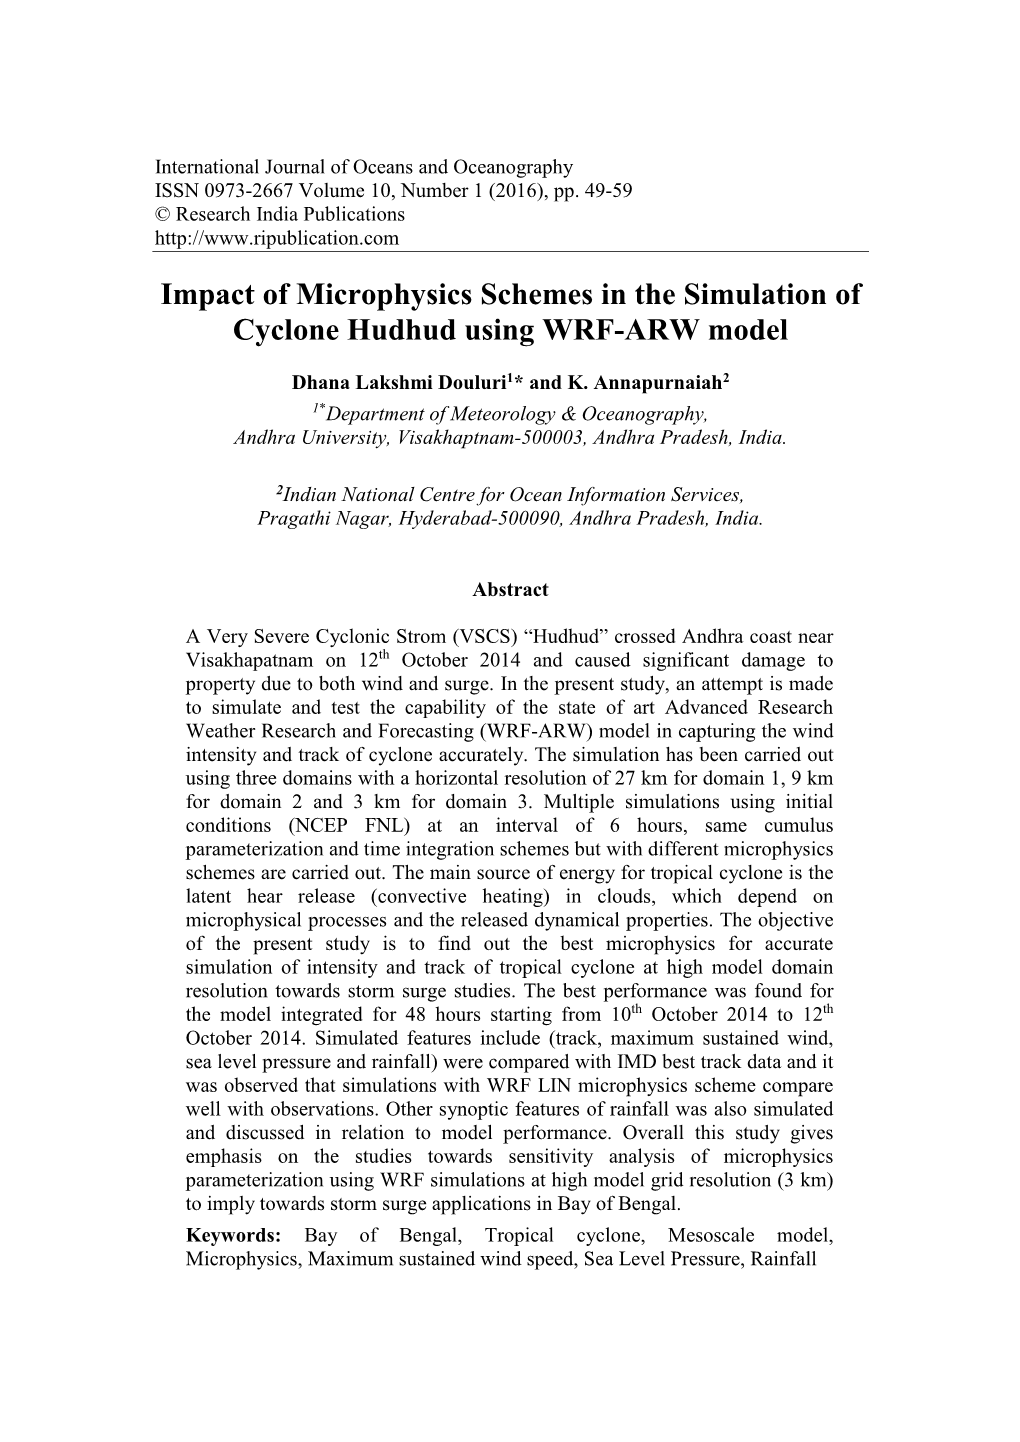 Impact of Microphysics Schemes in the Simulation of Cyclone Hudhud Using WRF-ARW Model